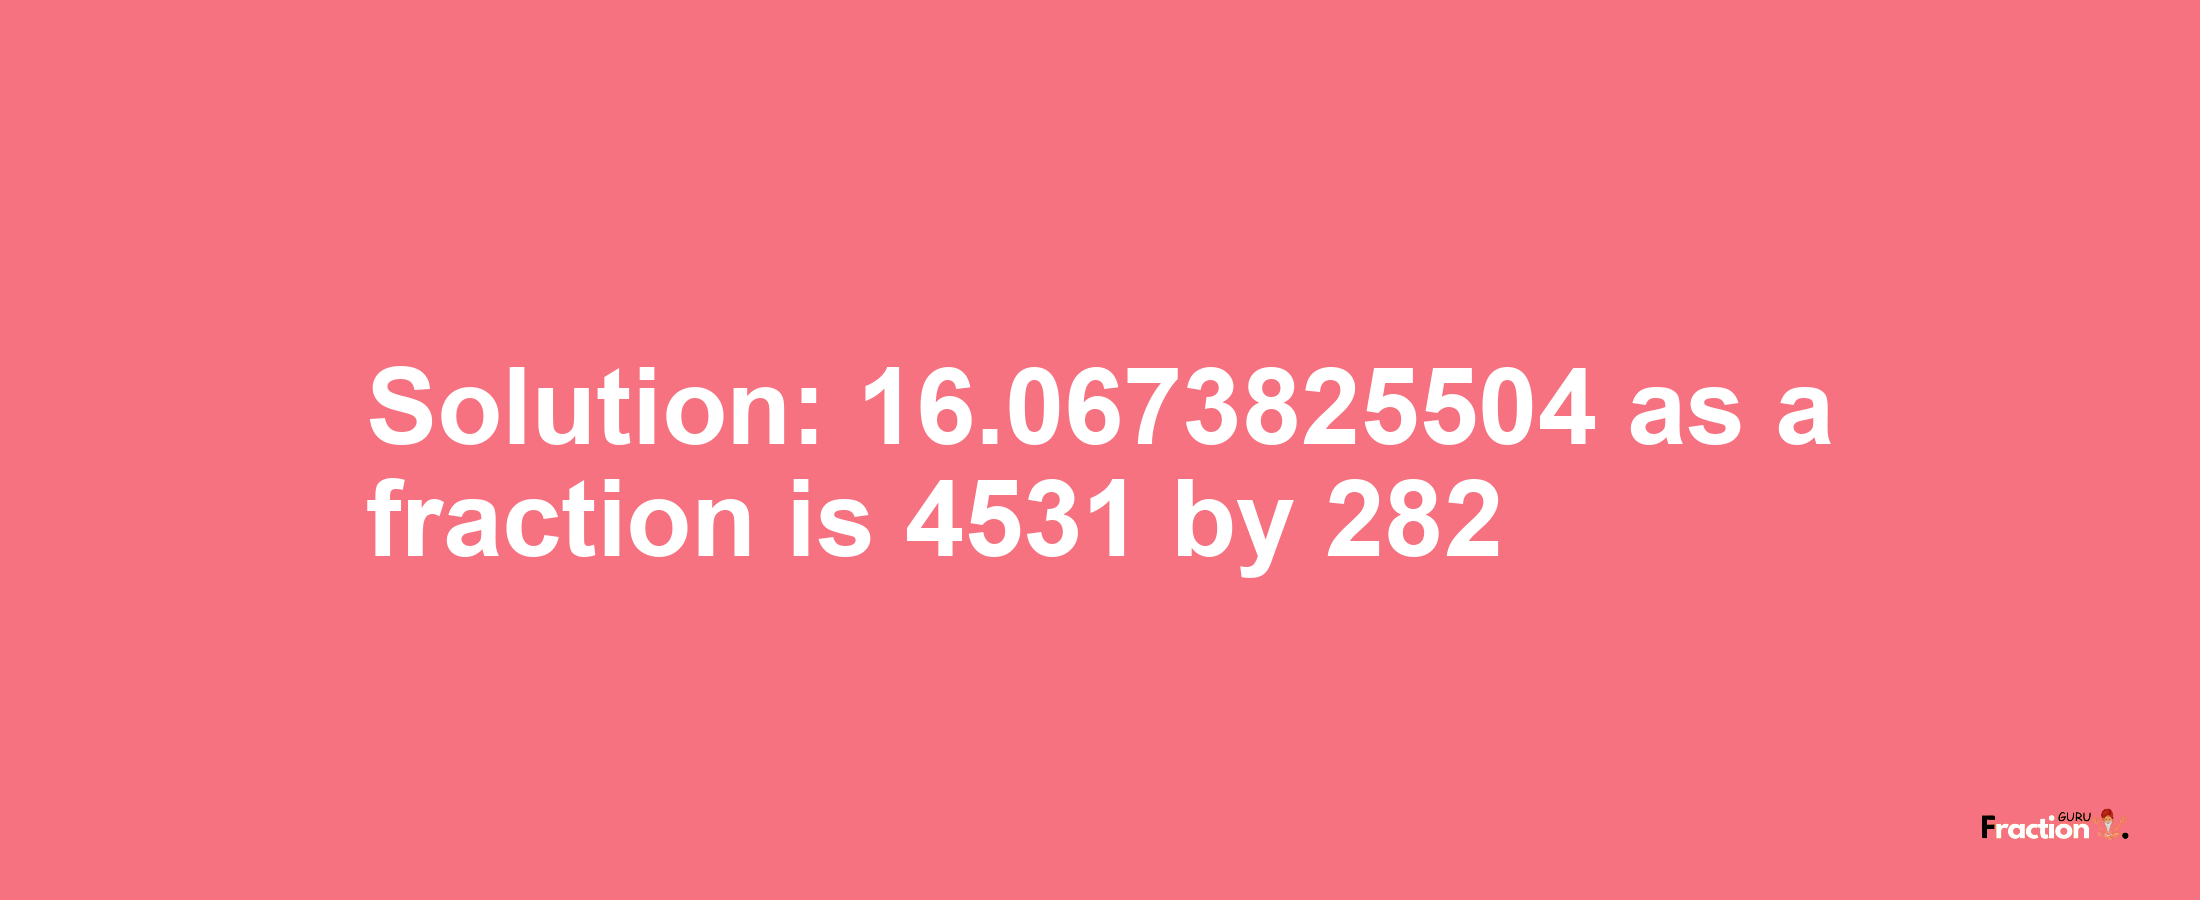 Solution:16.0673825504 as a fraction is 4531/282